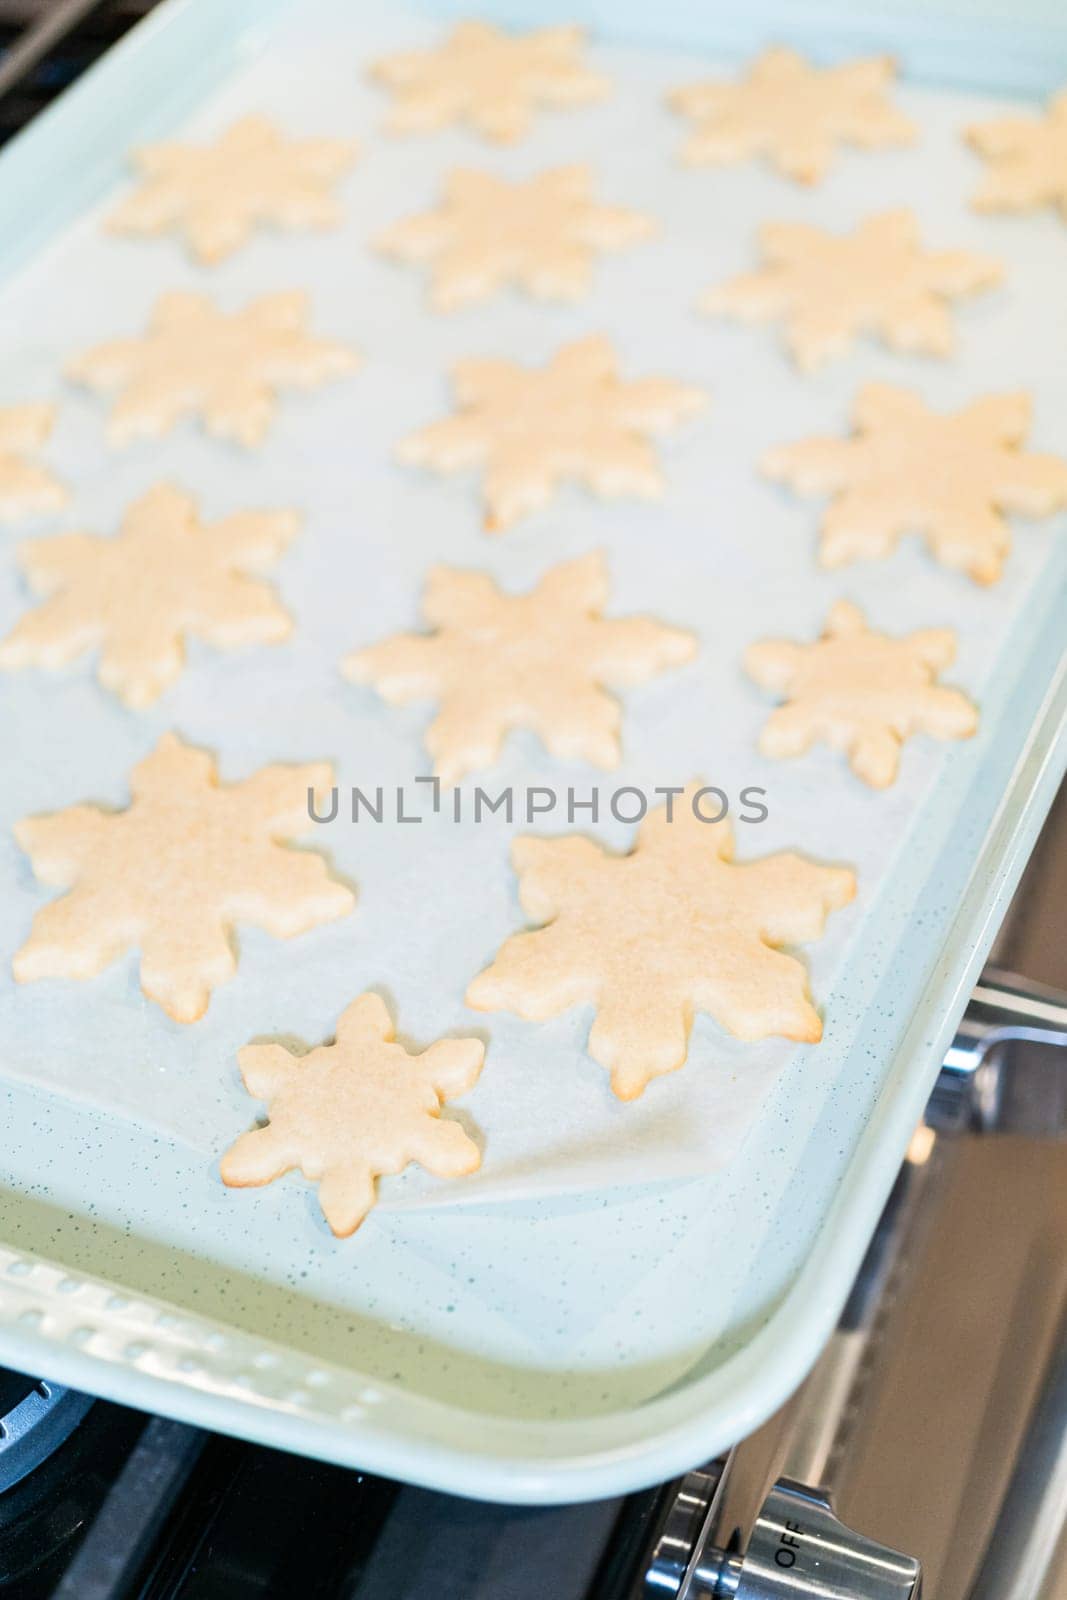 Baking Snowflake-Shaped Sugar Cookies for Homemade Christmas Gifts by arinahabich